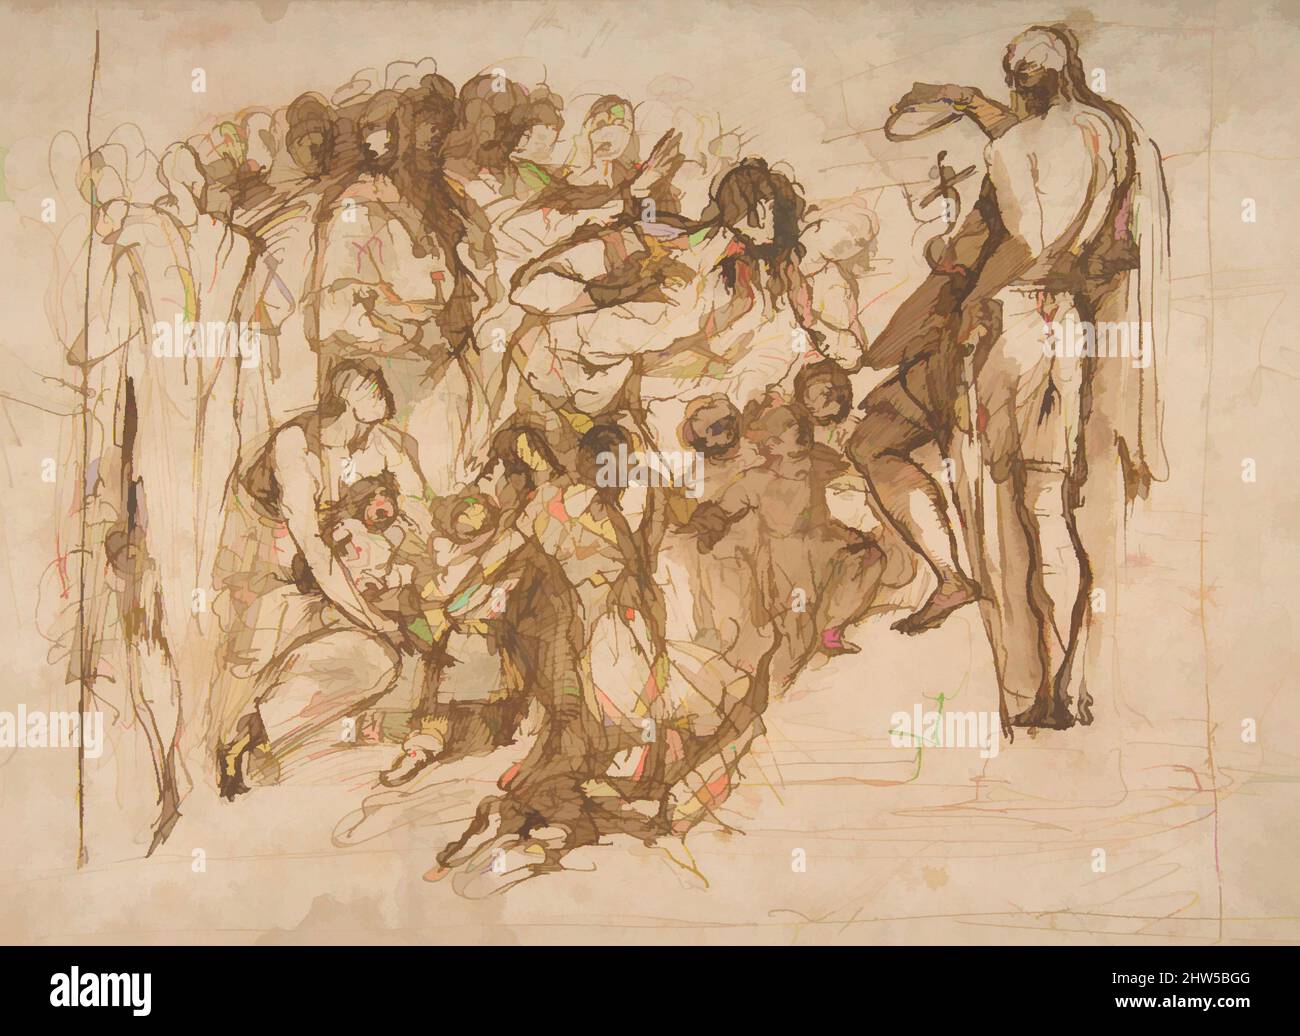 Art inspired by Saint John the Baptist Baptizing the Multitude, 1554–56, Pen and brown ink, brush and brown wash., 9 5/16 x 12 11/16in. (23.7 x 32.3cm), Drawings, Pellegrino Tibaldi (Italian, Puria di Valsolda 1527–1596 Milan), The drawing is a study for the lower half of a fresco on, Classic works modernized by Artotop with a splash of modernity. Shapes, color and value, eye-catching visual impact on art. Emotions through freedom of artworks in a contemporary way. A timeless message pursuing a wildly creative new direction. Artists turning to the digital medium and creating the Artotop NFT Stock Photo